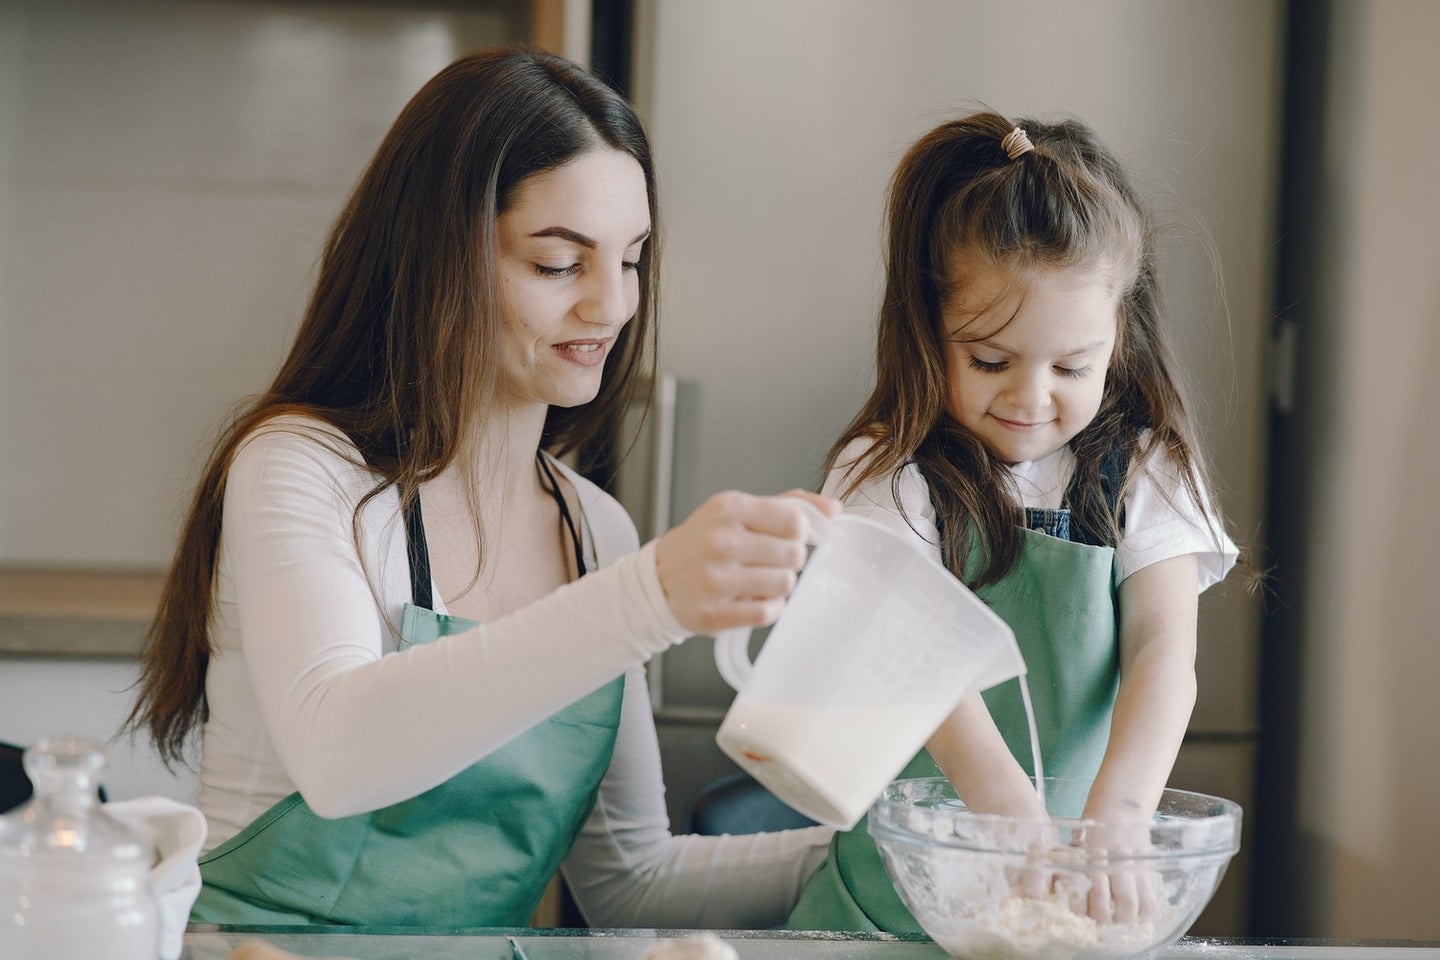 a woman and a child mixing materials in a bowl while wearing aprons, perhaps they are making a science project